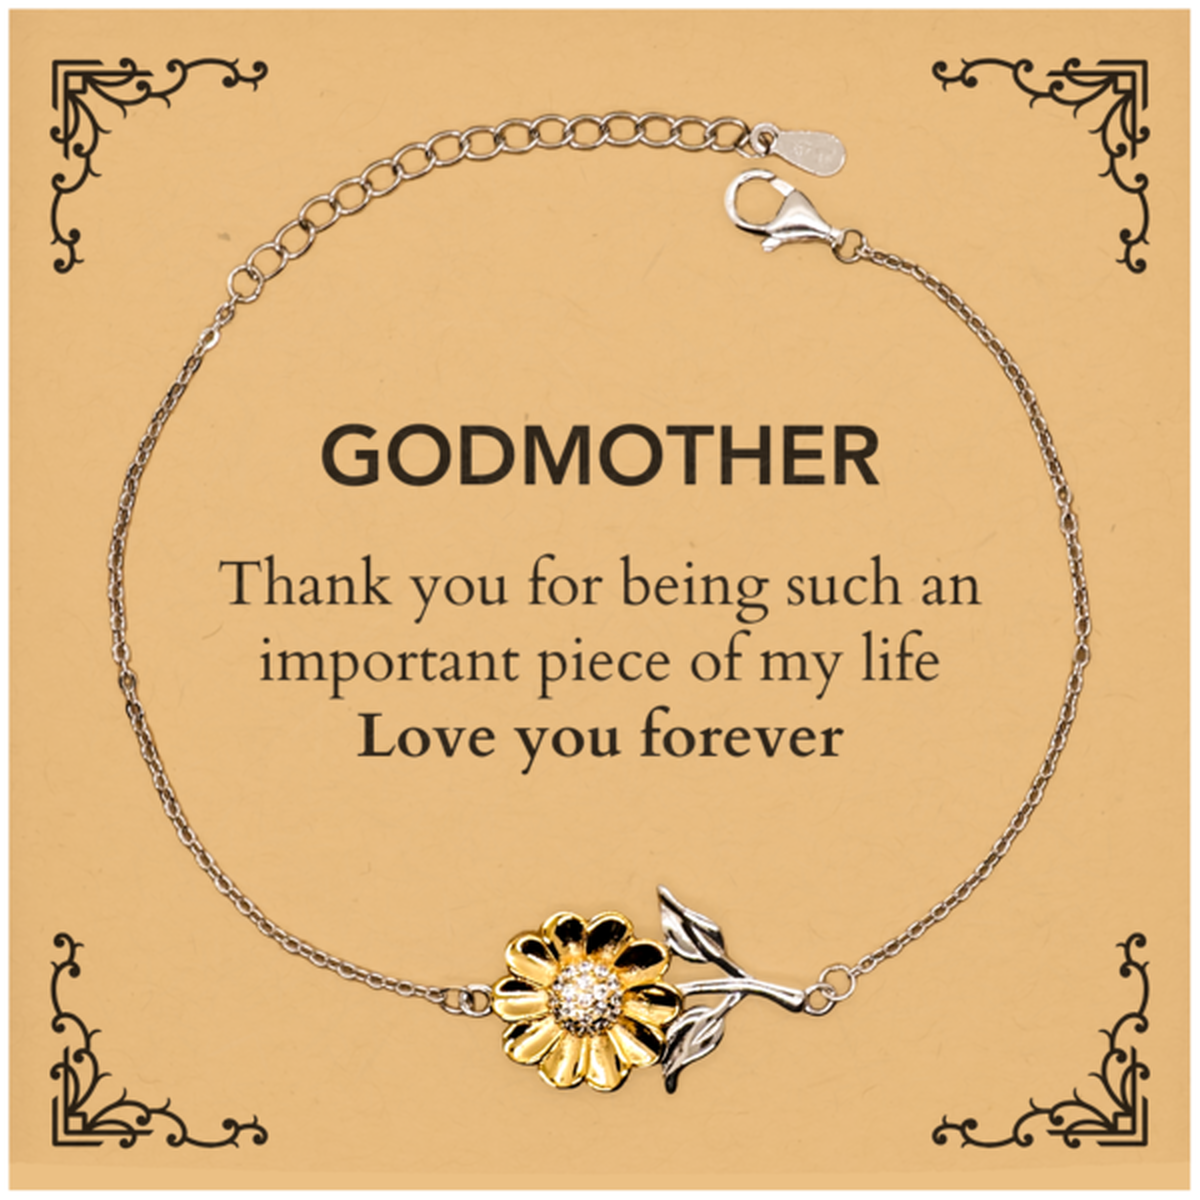 Appropriate Godmother Sunflower Bracelet Epic Birthday Gifts for Godmother Thank you for being such an important piece of my life Godmother Christmas Mothers Fathers Day